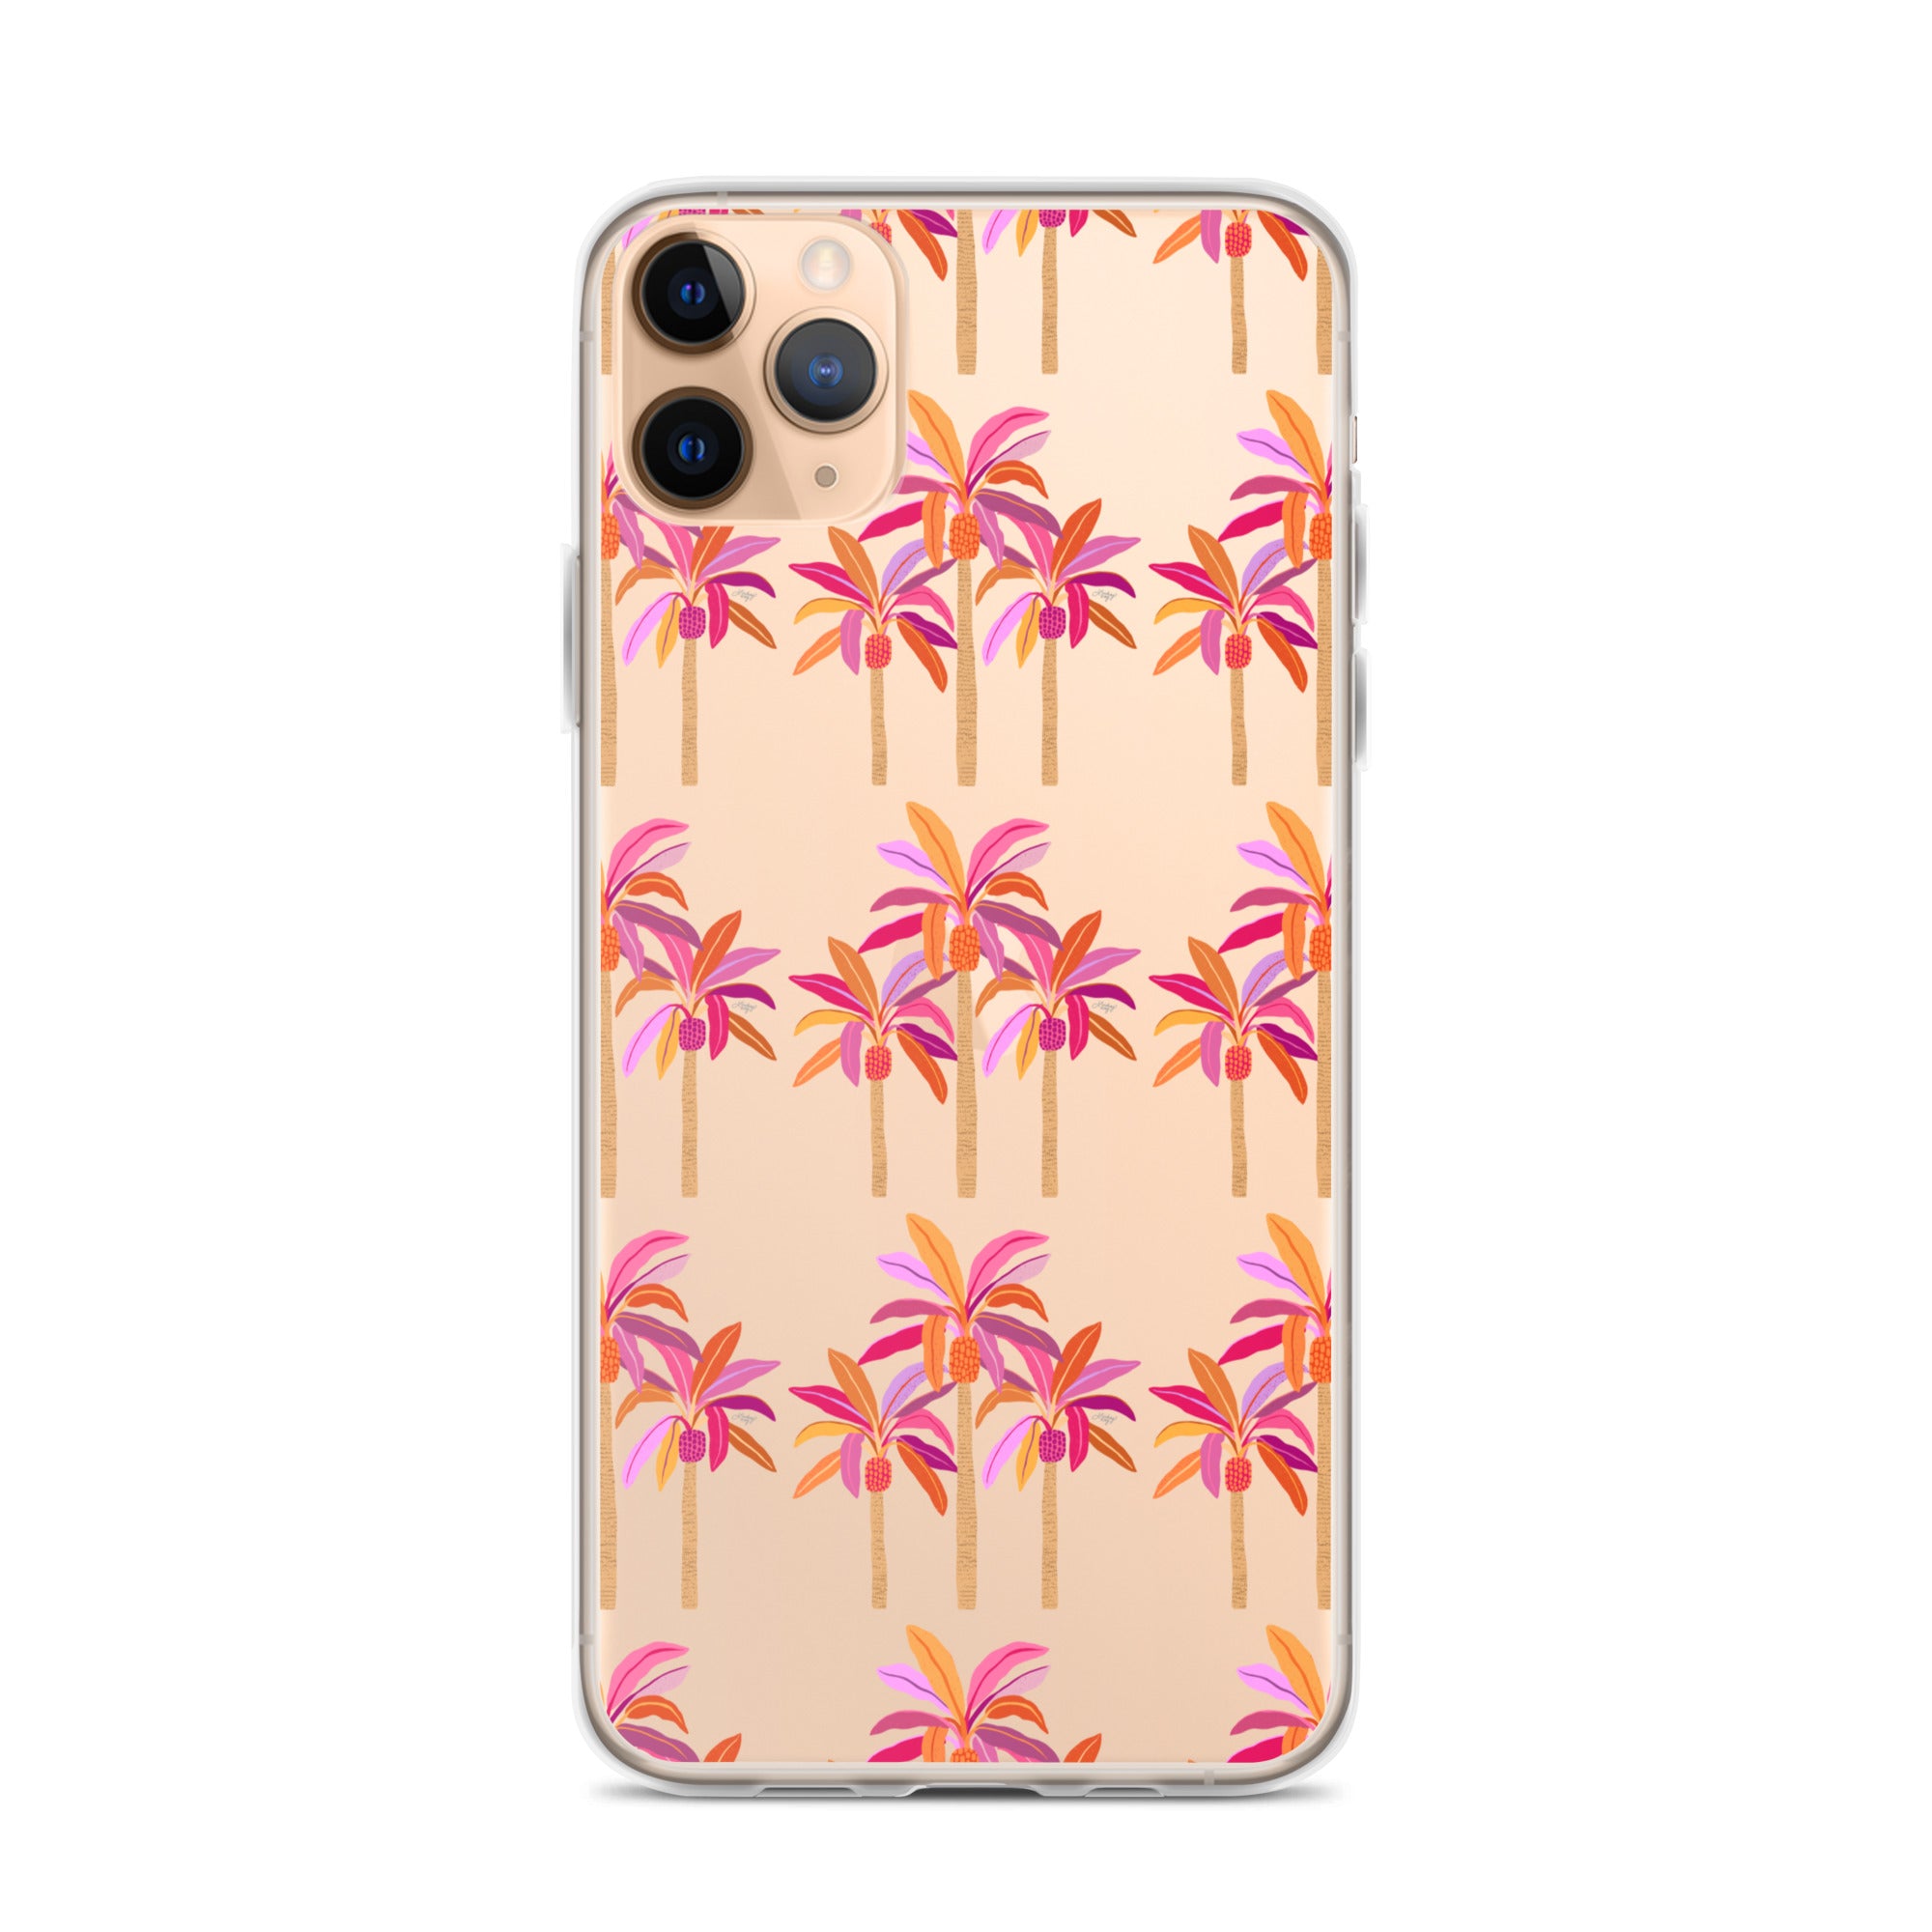 palm tree illustration pattern iphone phone case clear cute trendy lindsey kay collective